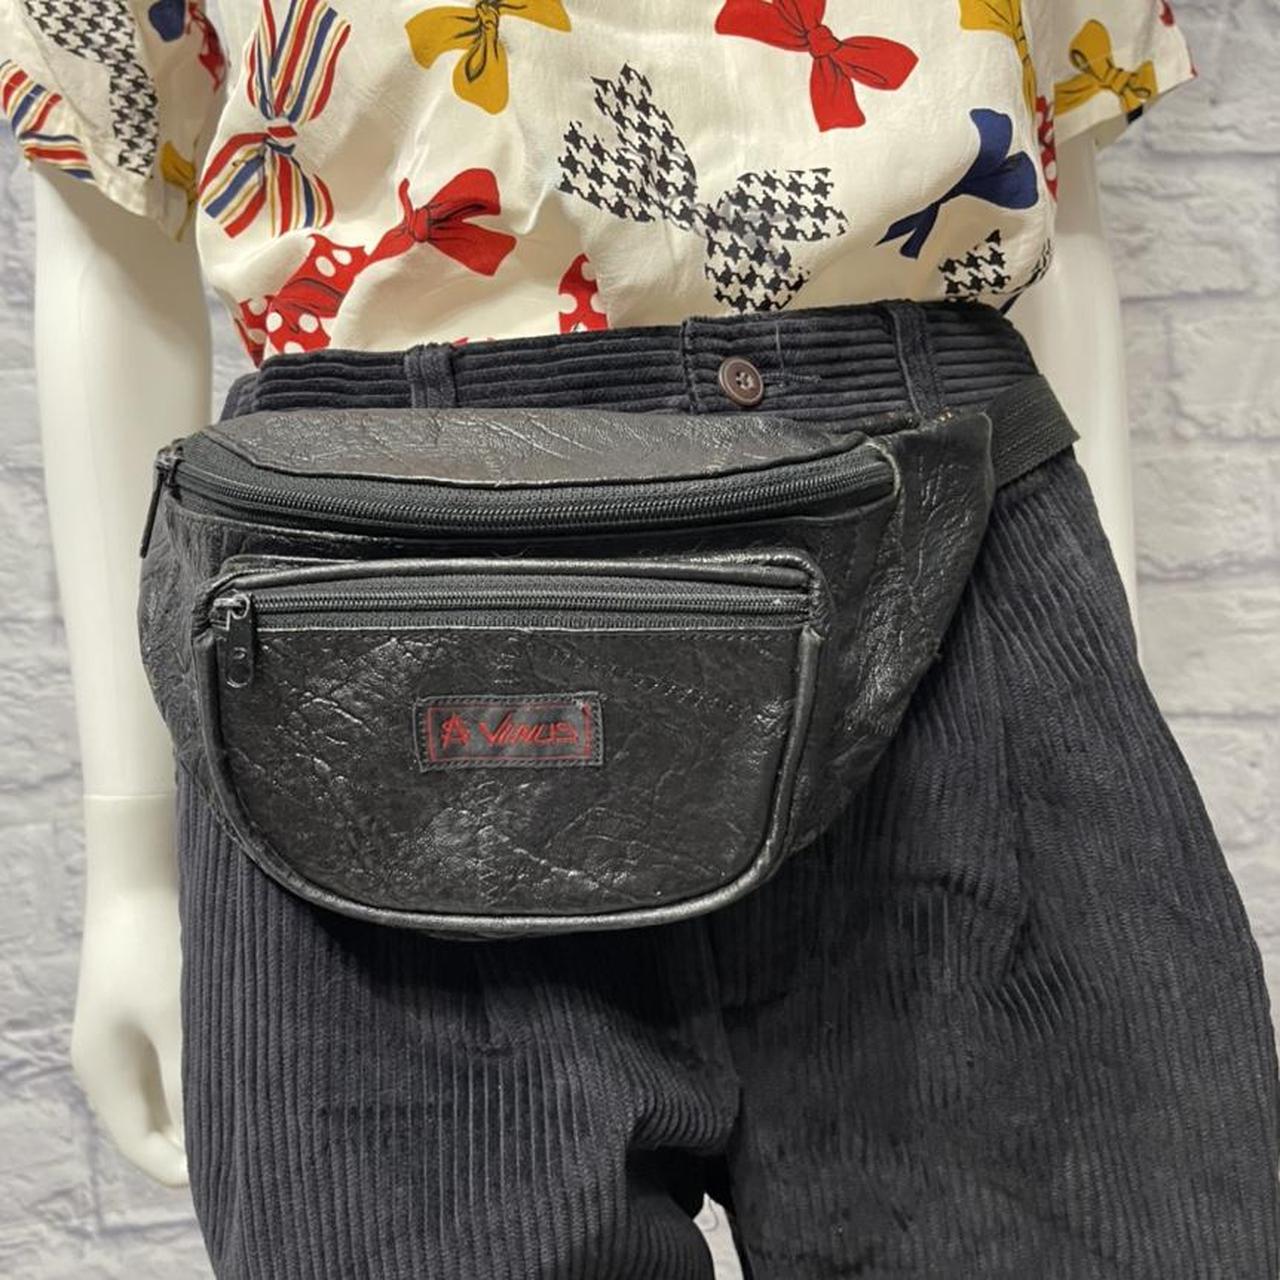 Product Image 2 - ▪️Vintage Fanny Pack▪️
Brand: Venus- From